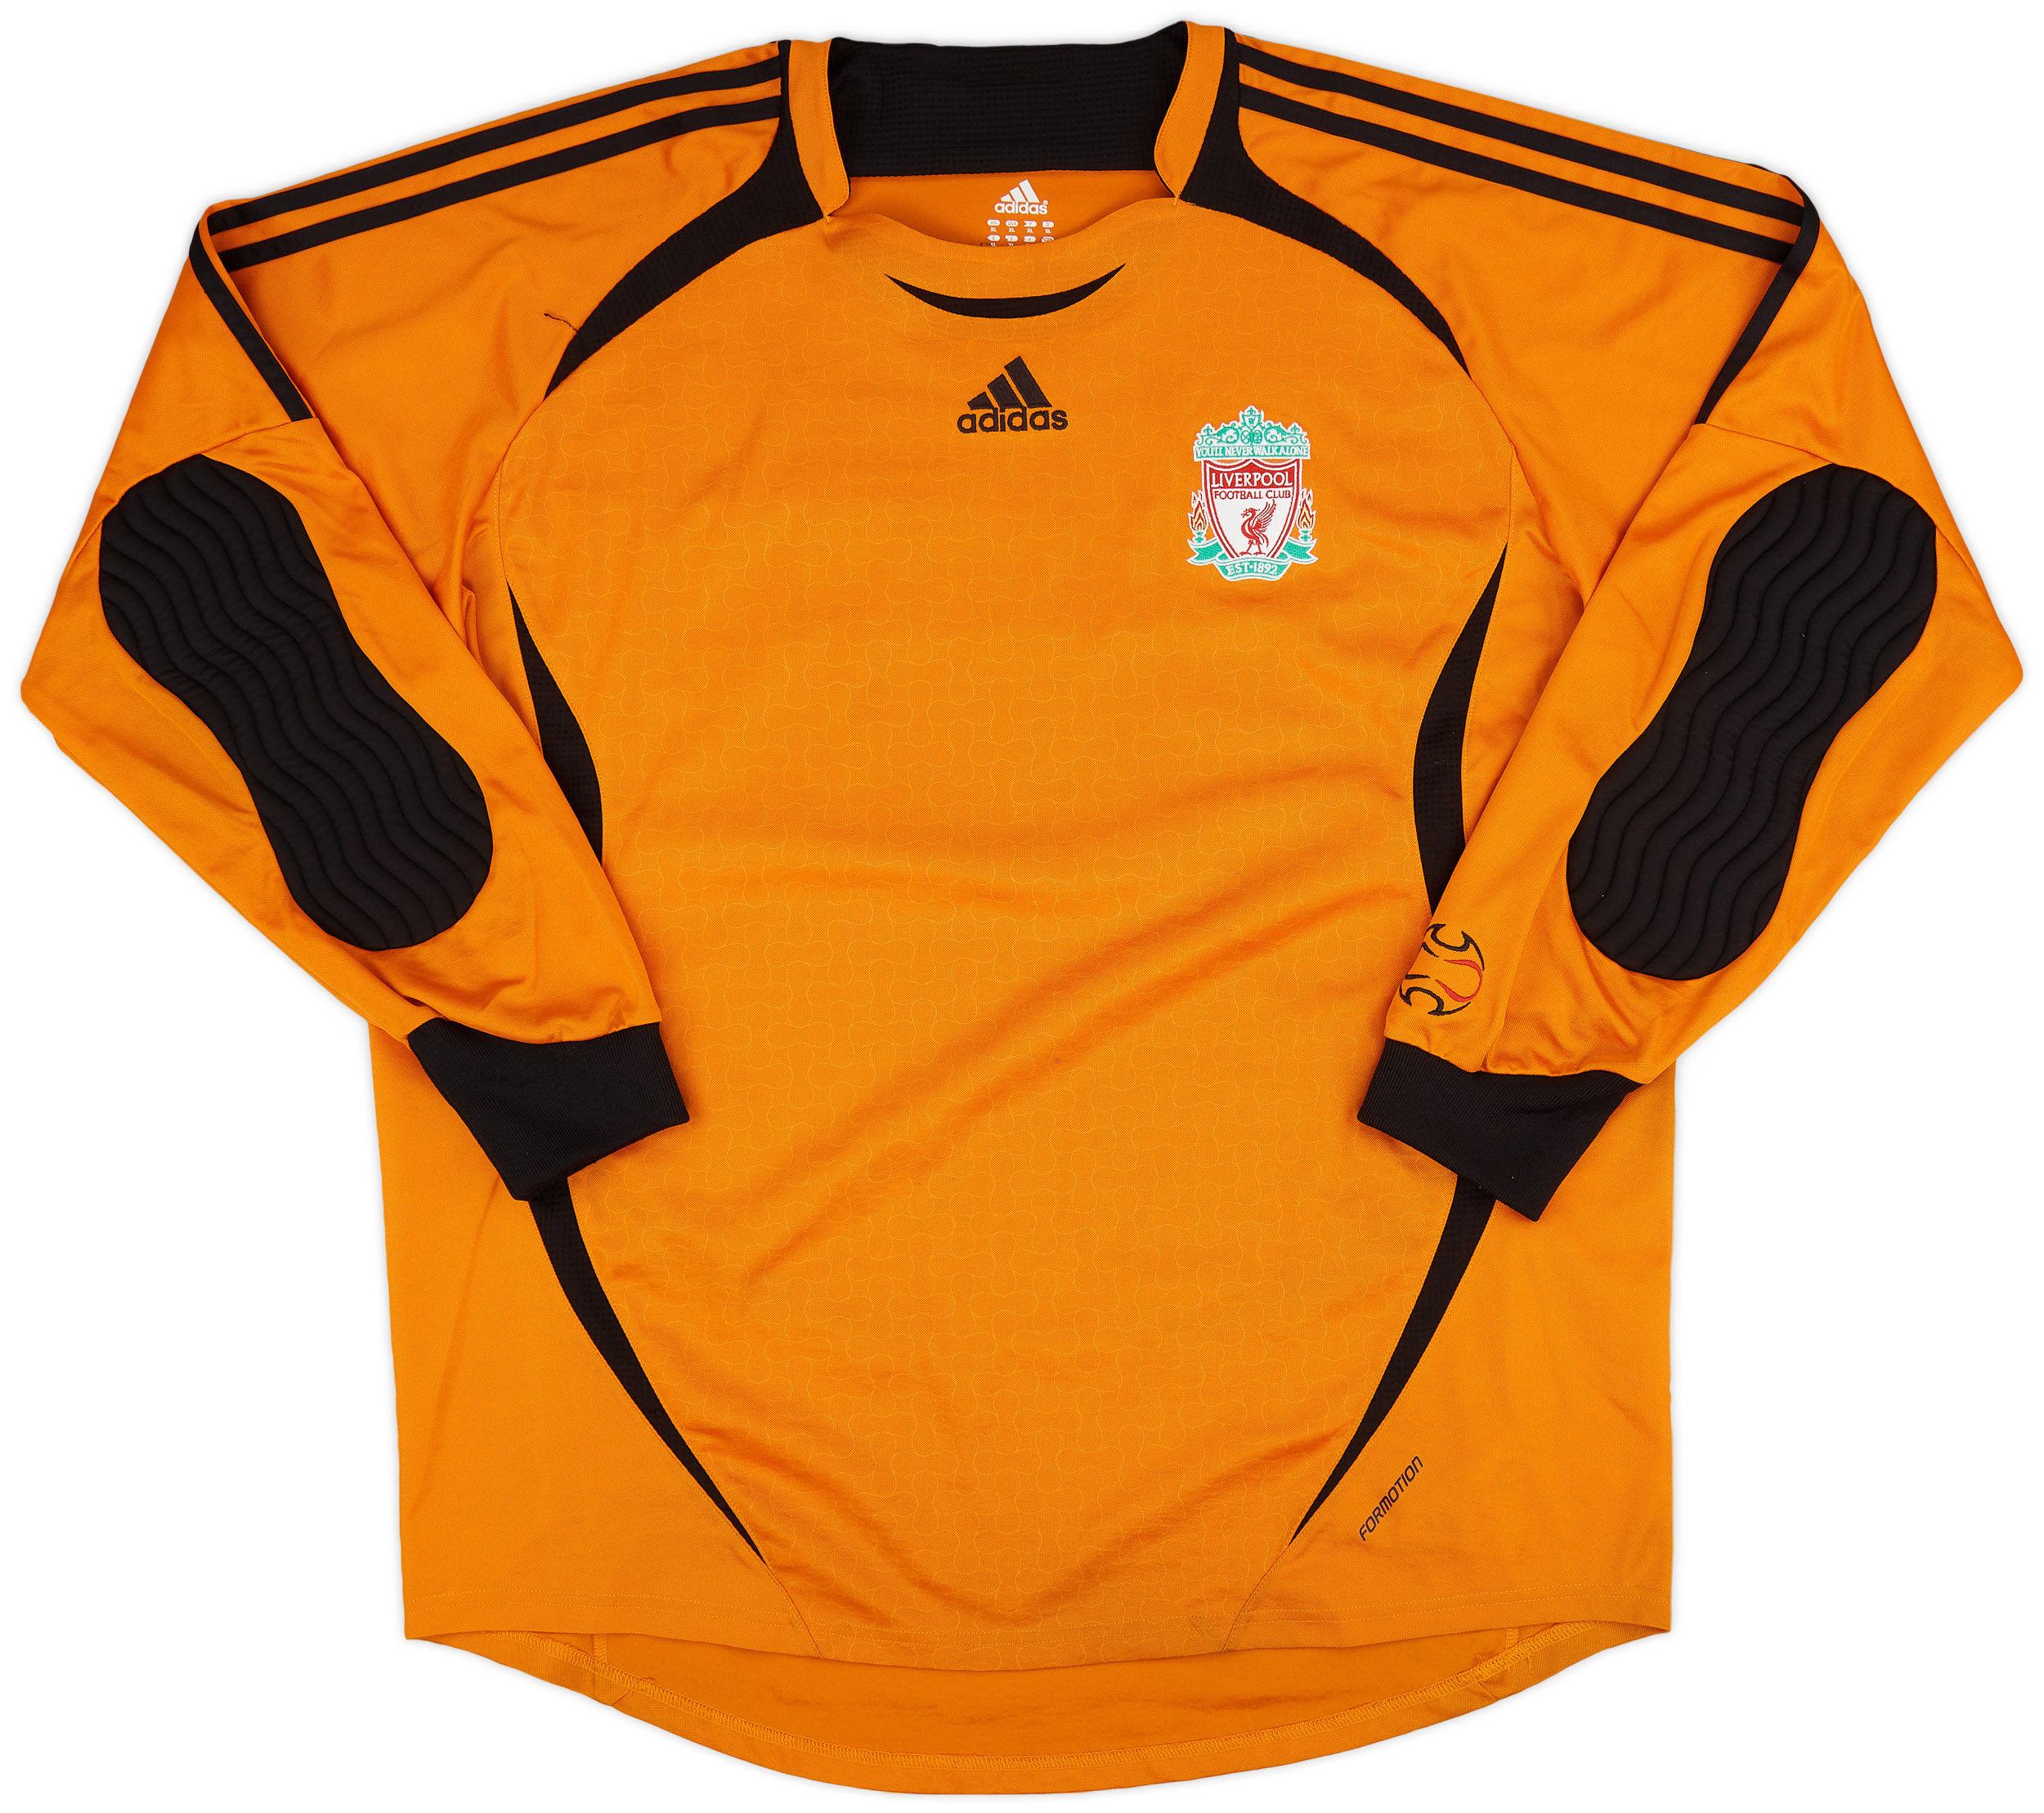 2006-07 Liverpool Player Issue GK Shirt - 8/10 - ()